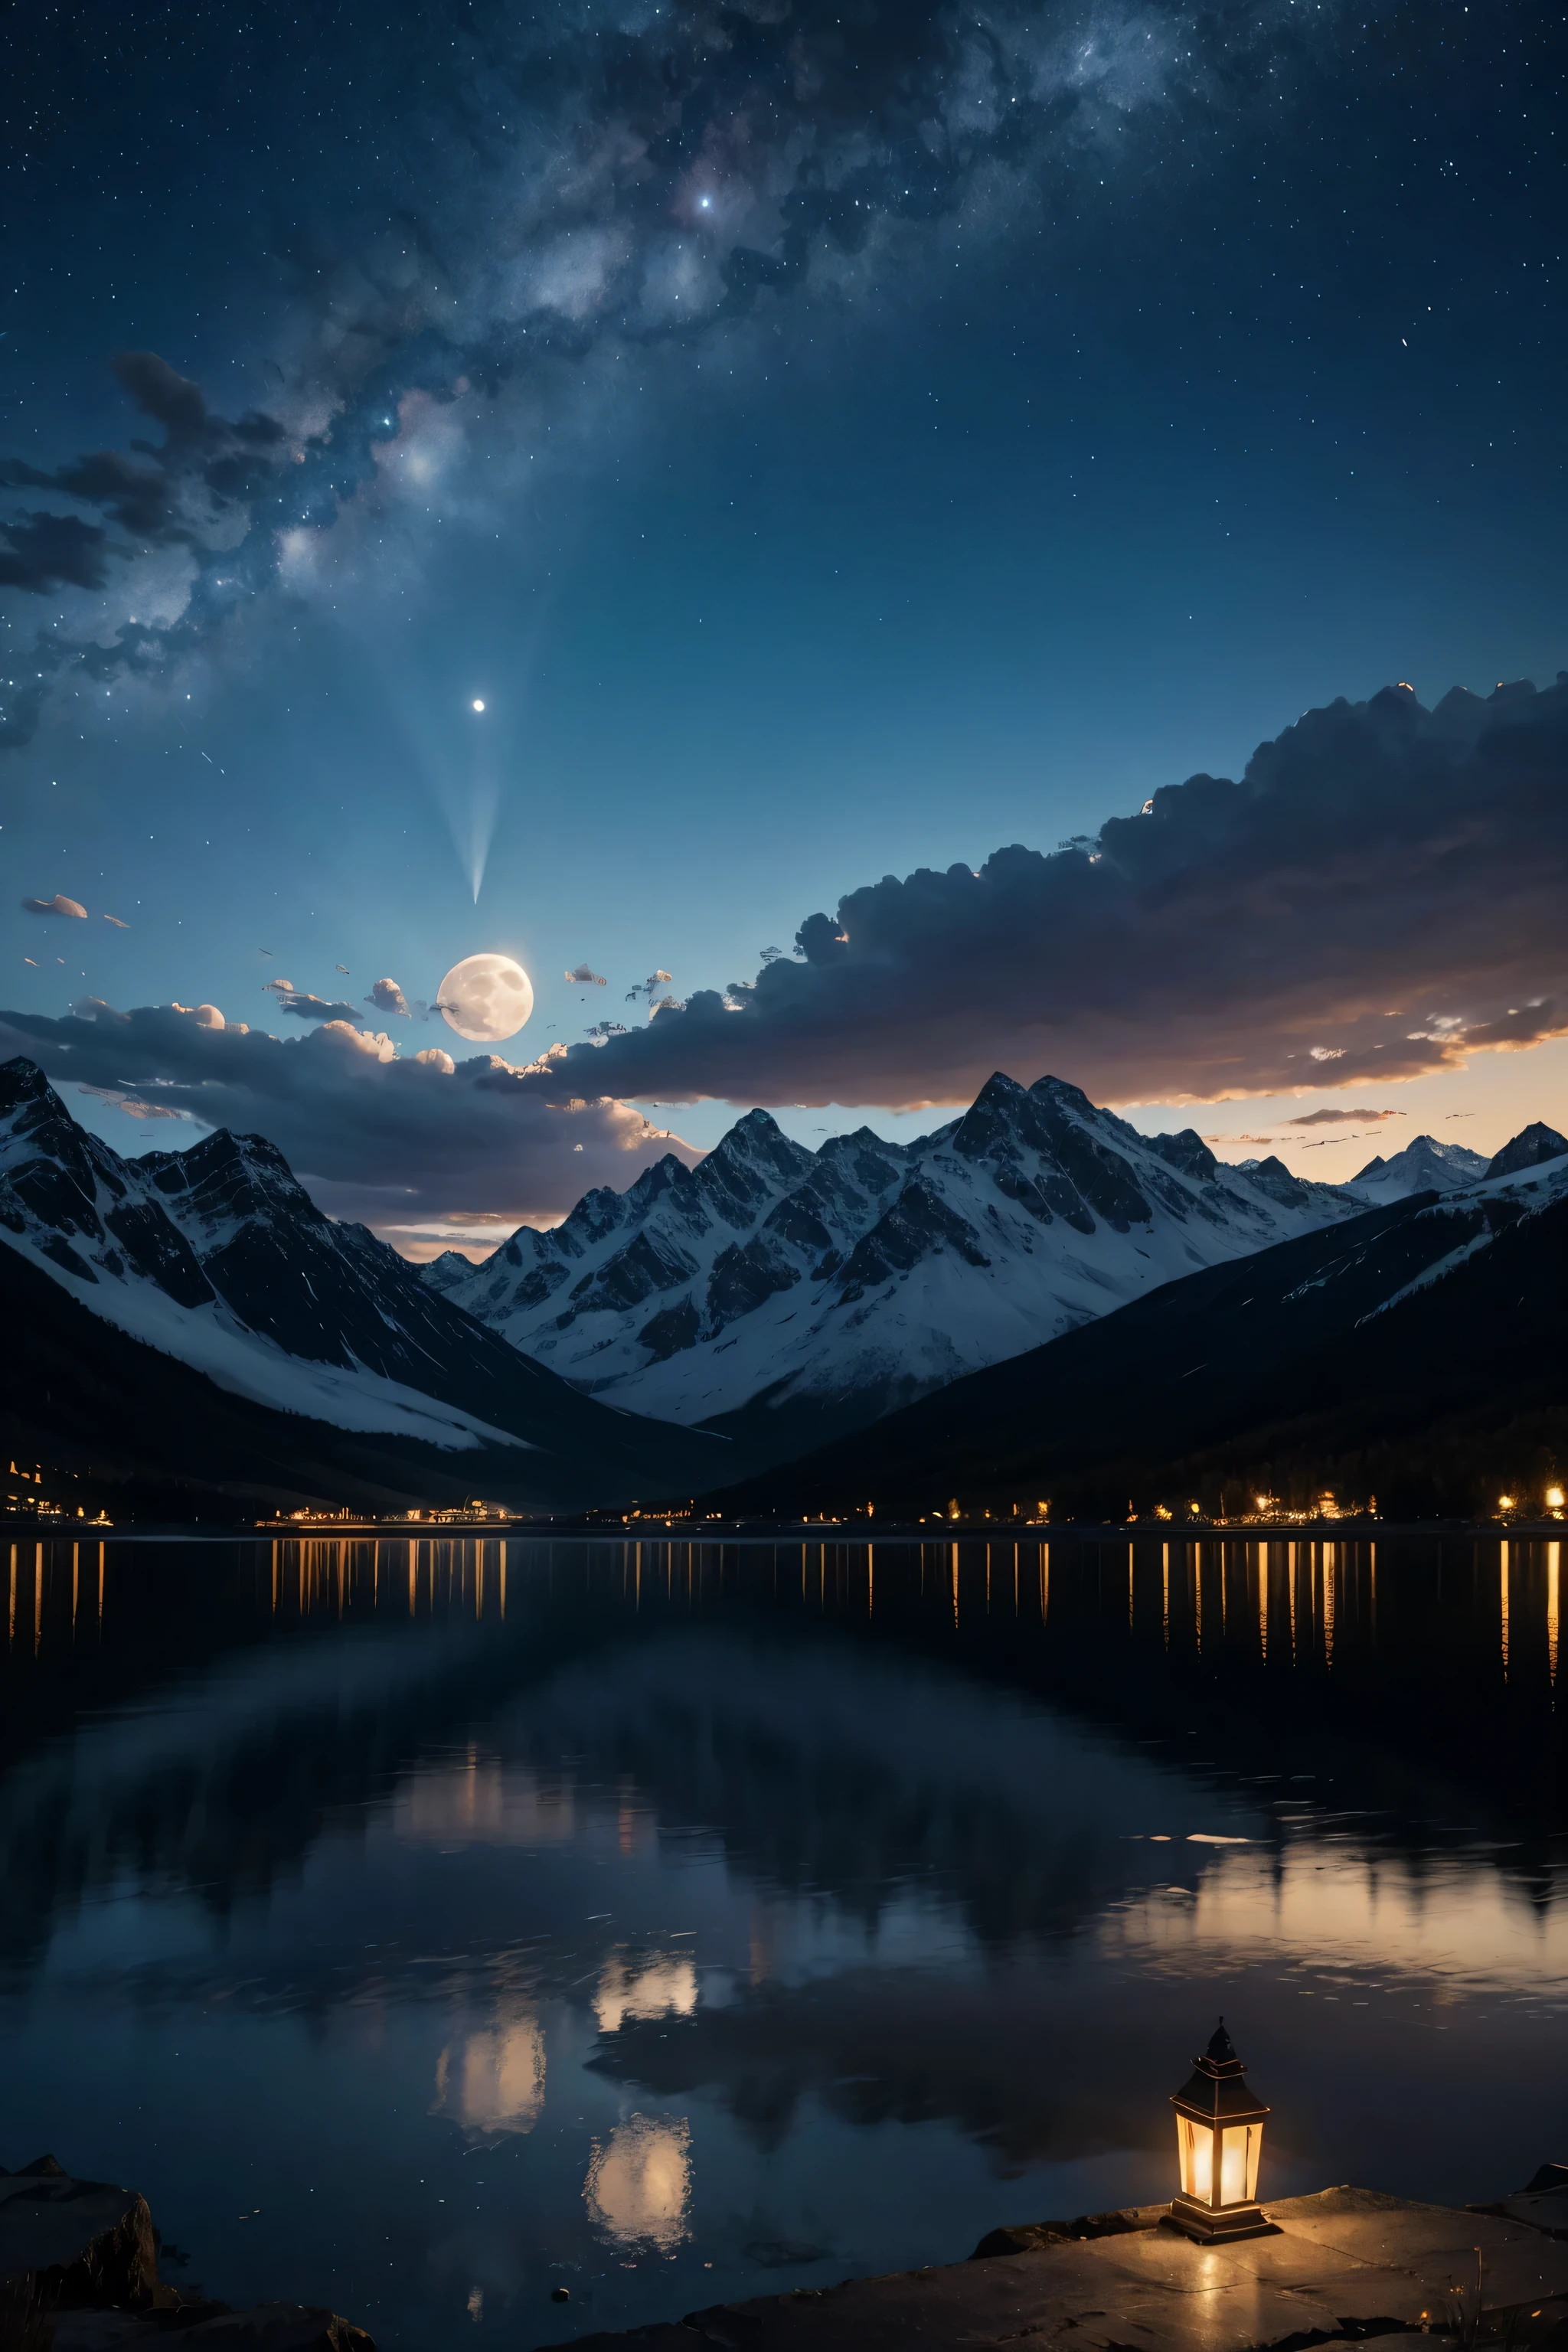 The full moon hangs high in the sky，starry night sky，Stars and mountains reflected in the lake, 4k highly detailed digital art, 8K Stunning Artwork, , Epic Fantasy Science Fiction,, Impressive fantasy scenery,